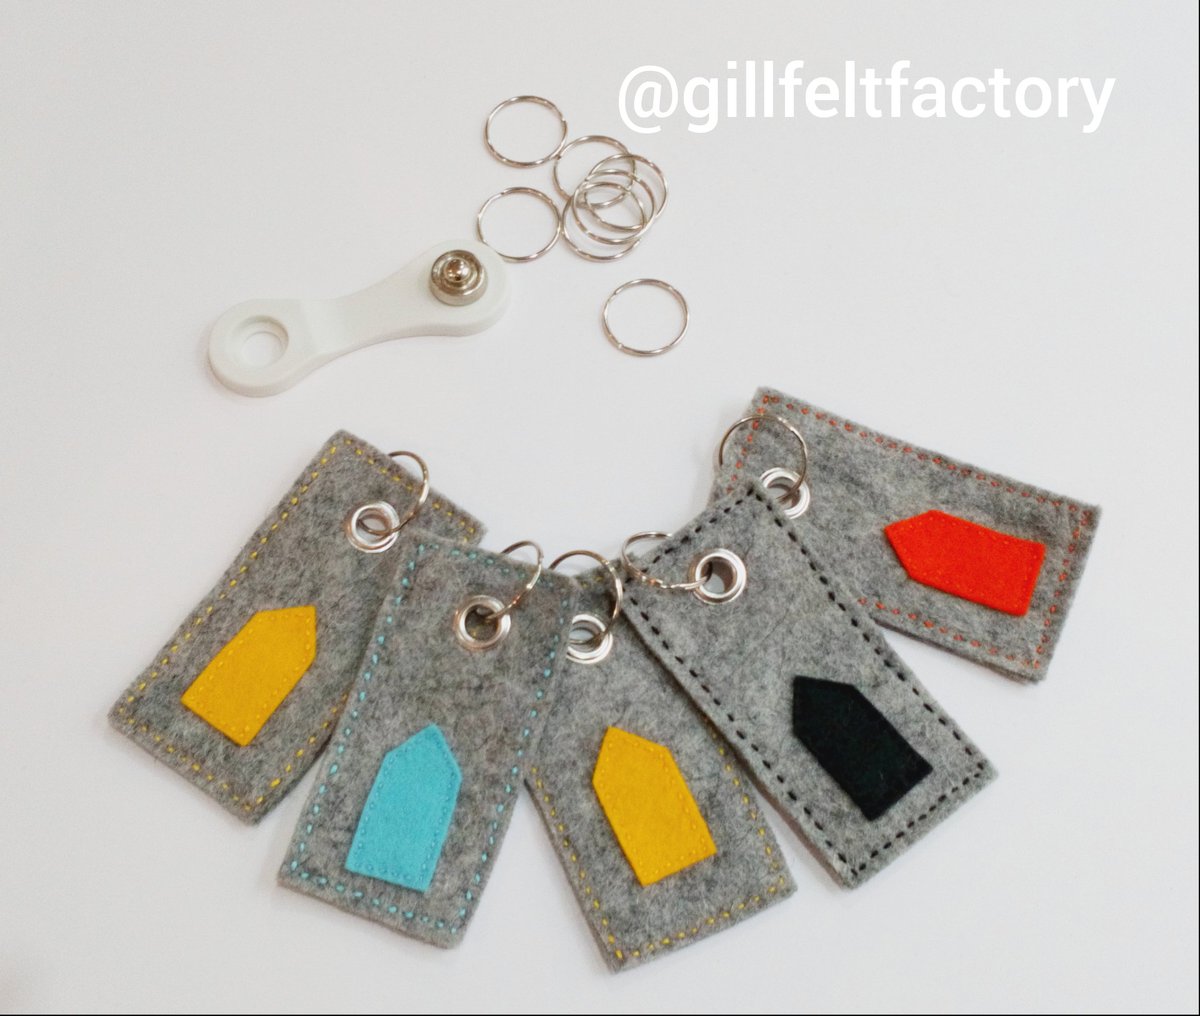 When you've got left over felt that you don't want to waste.... make itsy bitsy stuff for your craft fair!

100% soft wool felt keyrings that you can find when you're rifling around in your bag!!

(I'm keeping the wobbly blue one 😉) 

#handmade
#quickmakes
#handmade